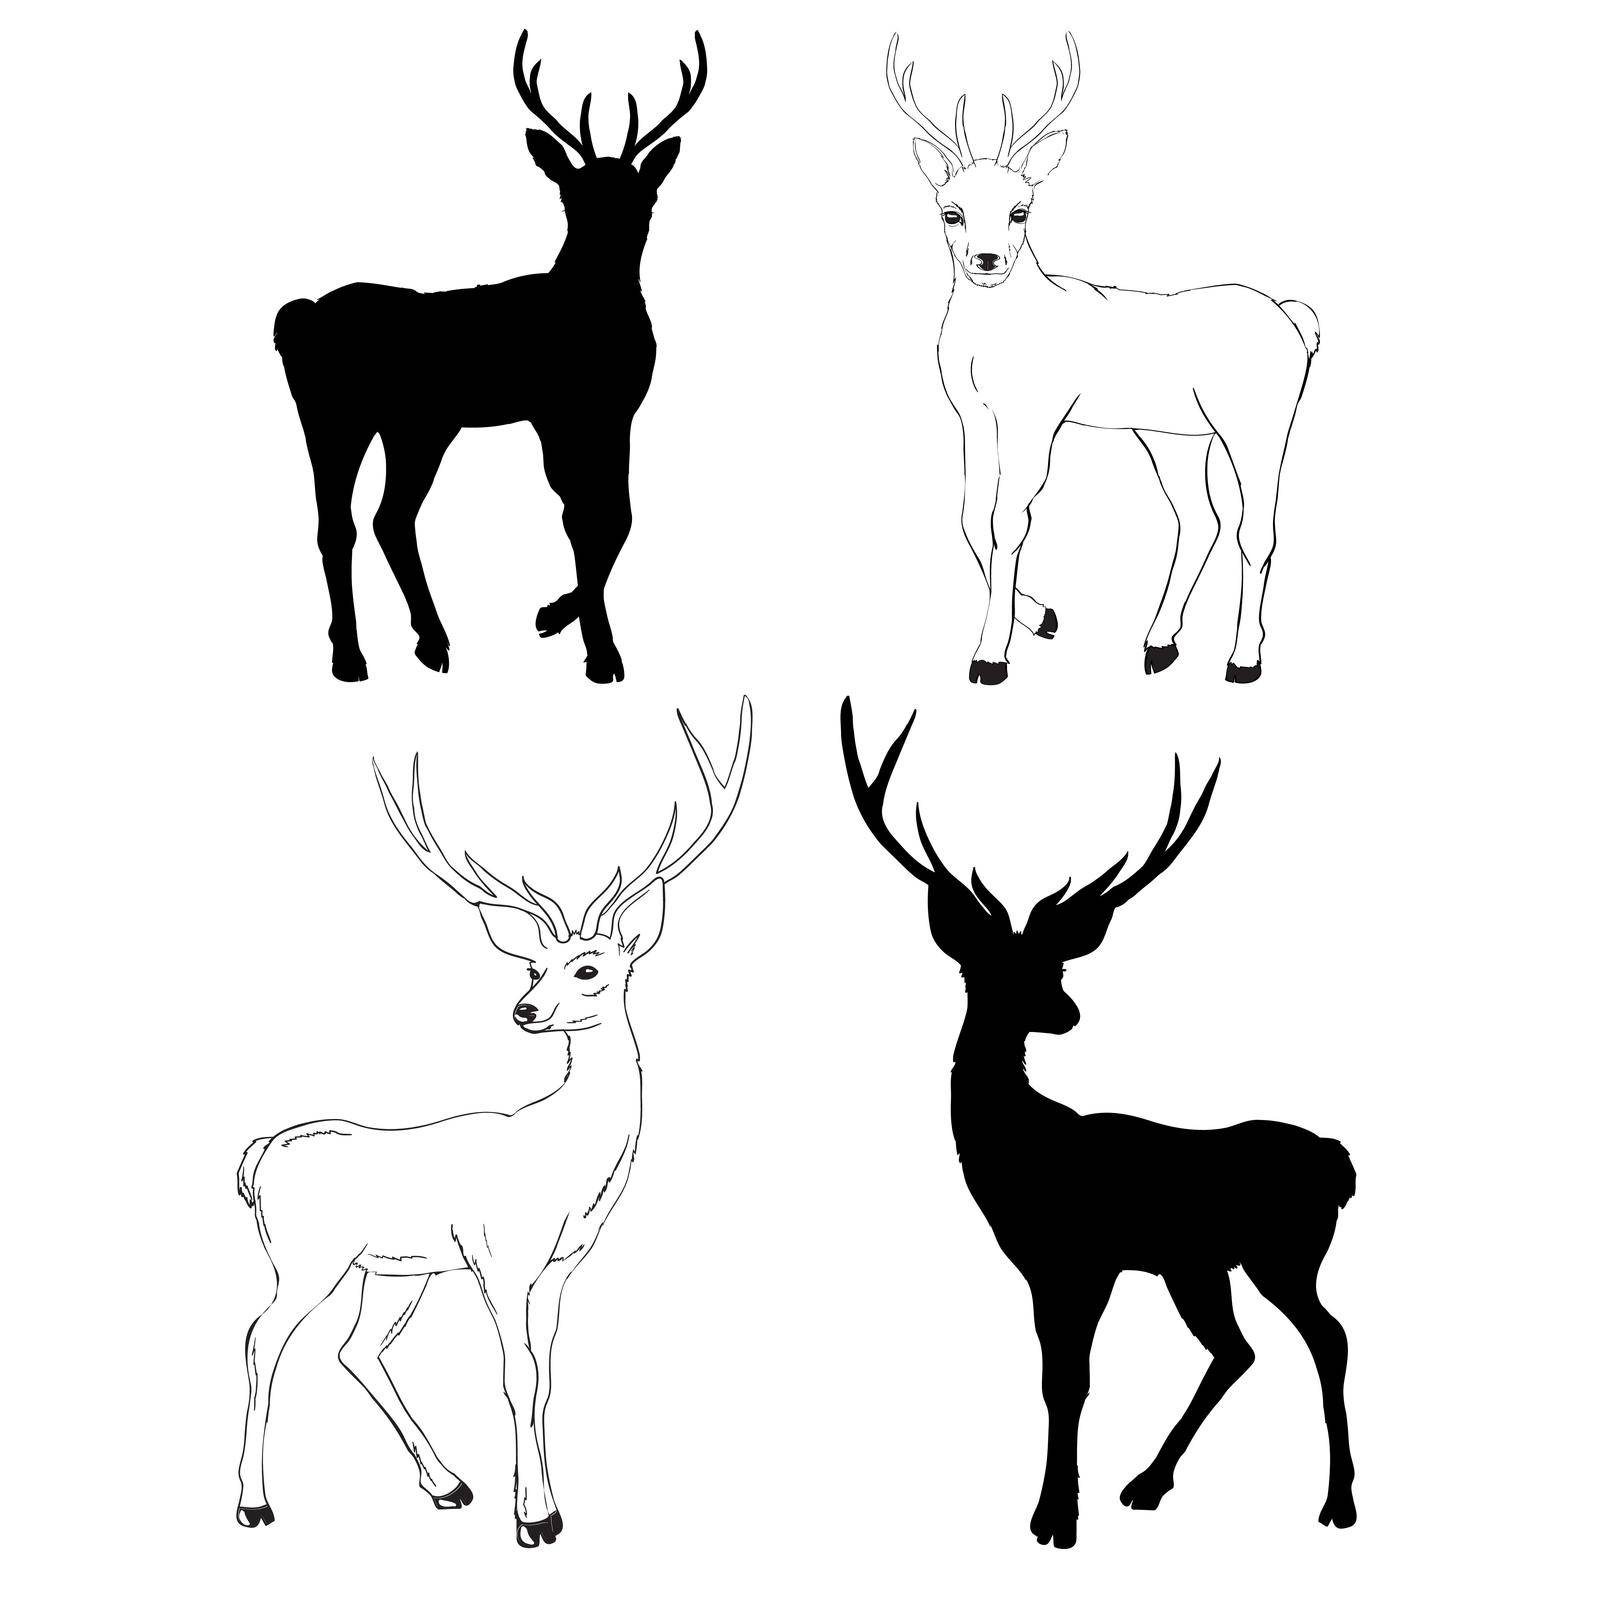 deer silhouette and sketch, vector, illustration, animals, set on white background, animals image